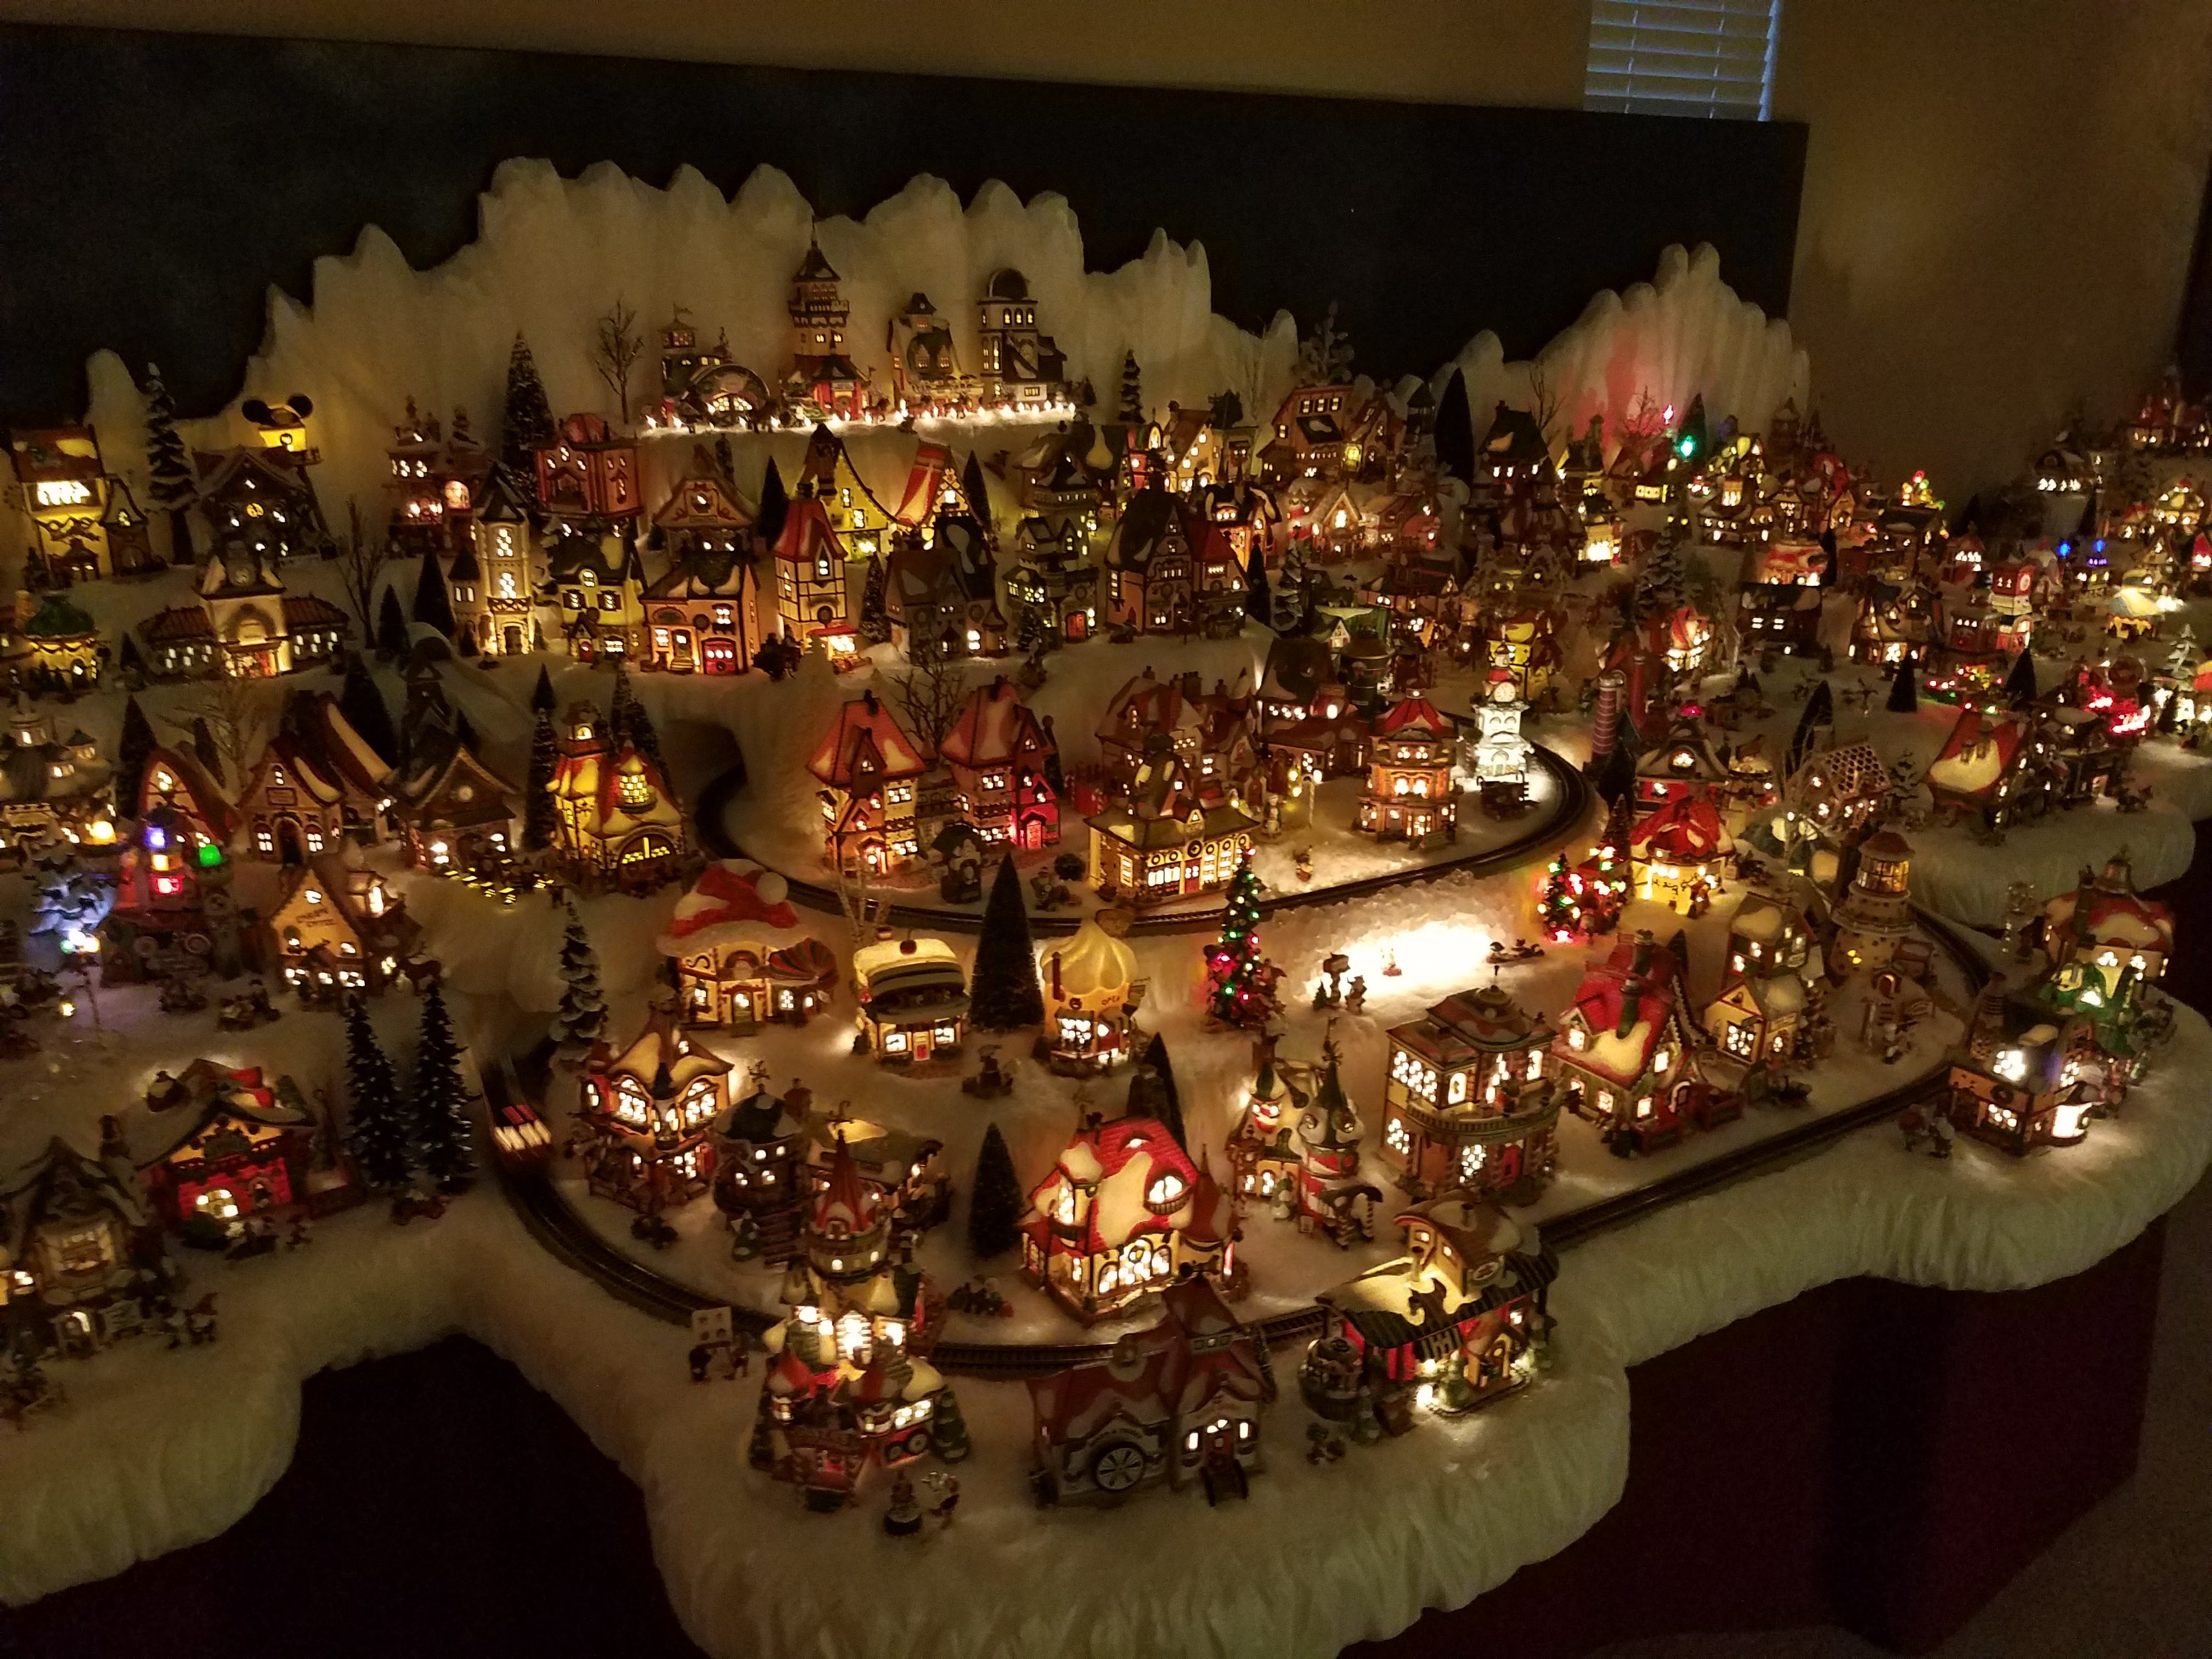 This is the biggest tiny Christmas village we've ever seen